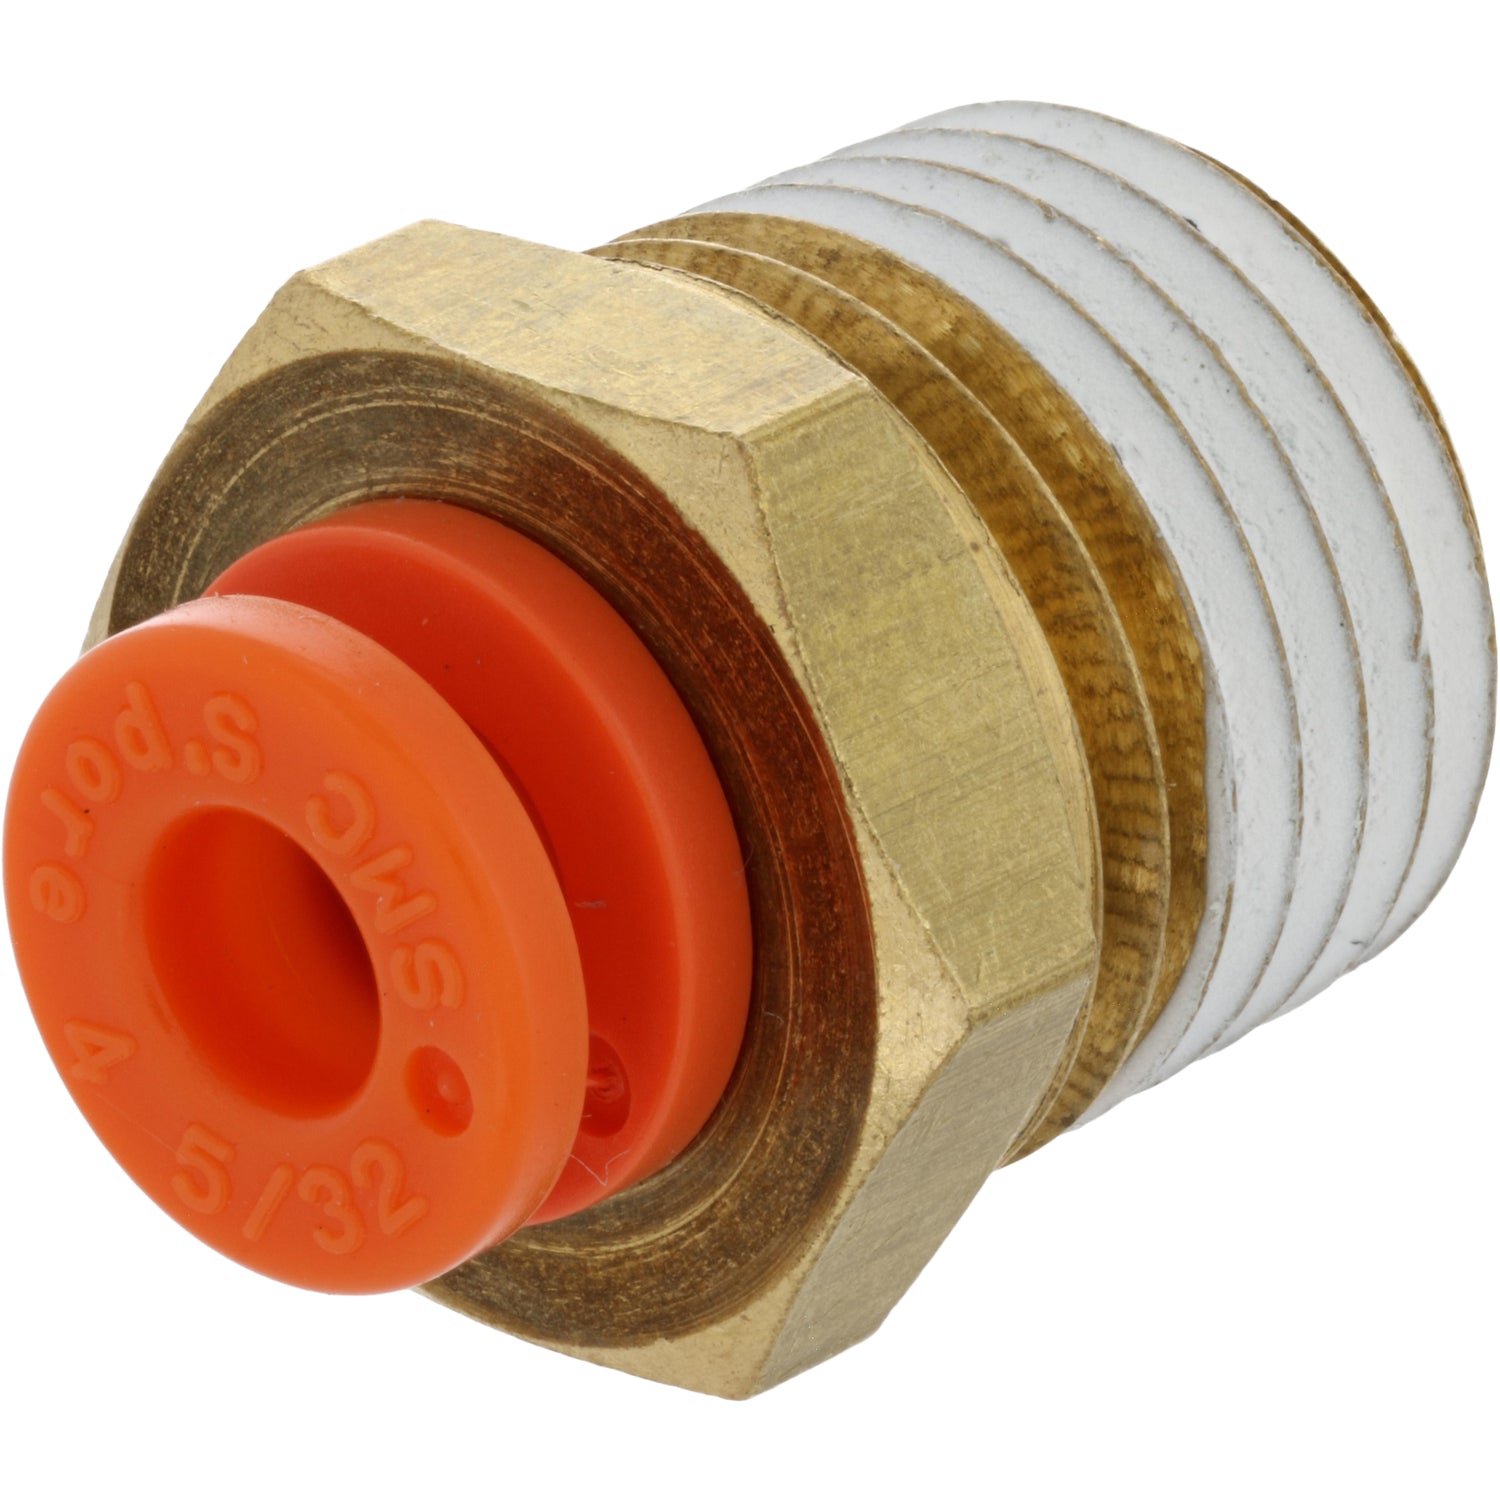 Brass threaded male connector with orange push collar on white background. 